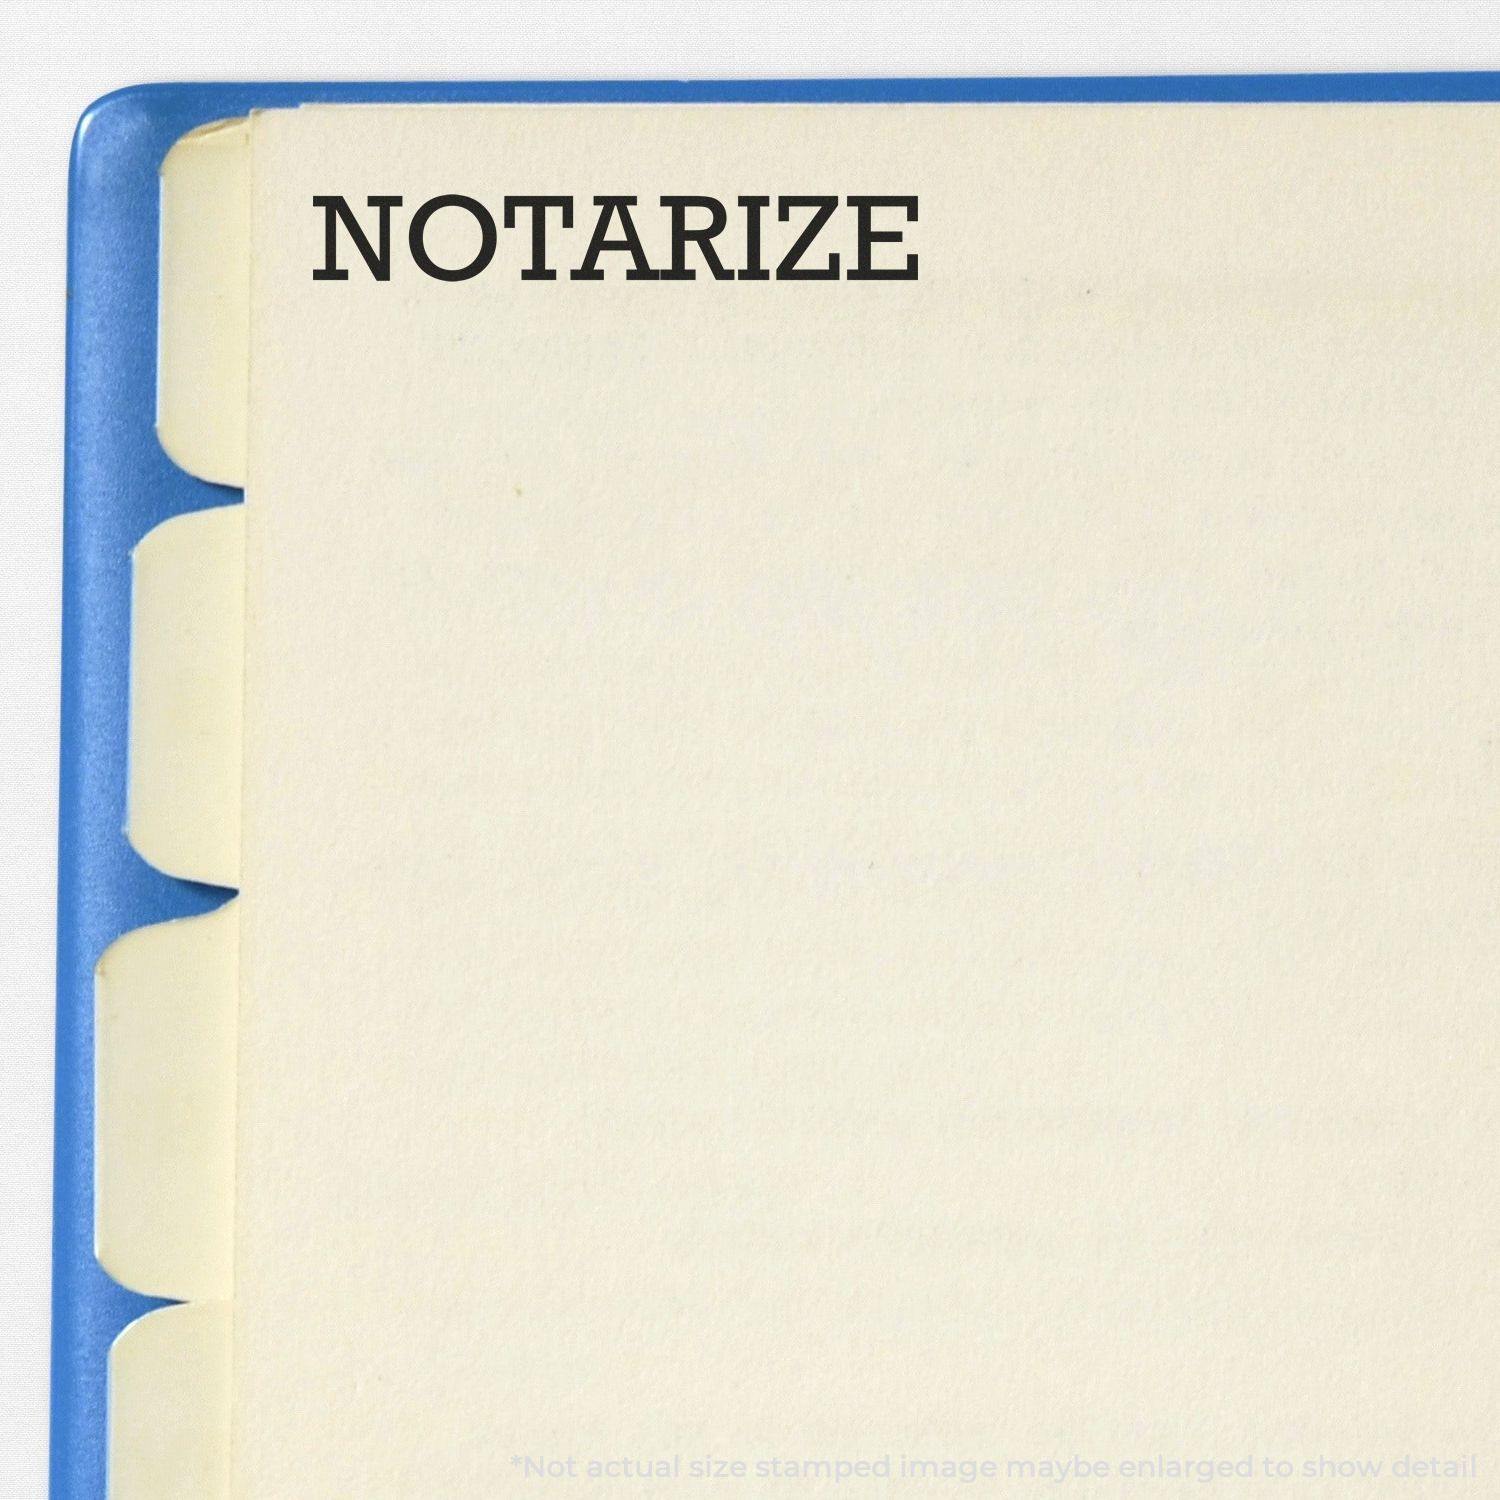 A stock office rubber stamp with a stamped image showing how the text "NOTARIZE" is displayed after stamping.